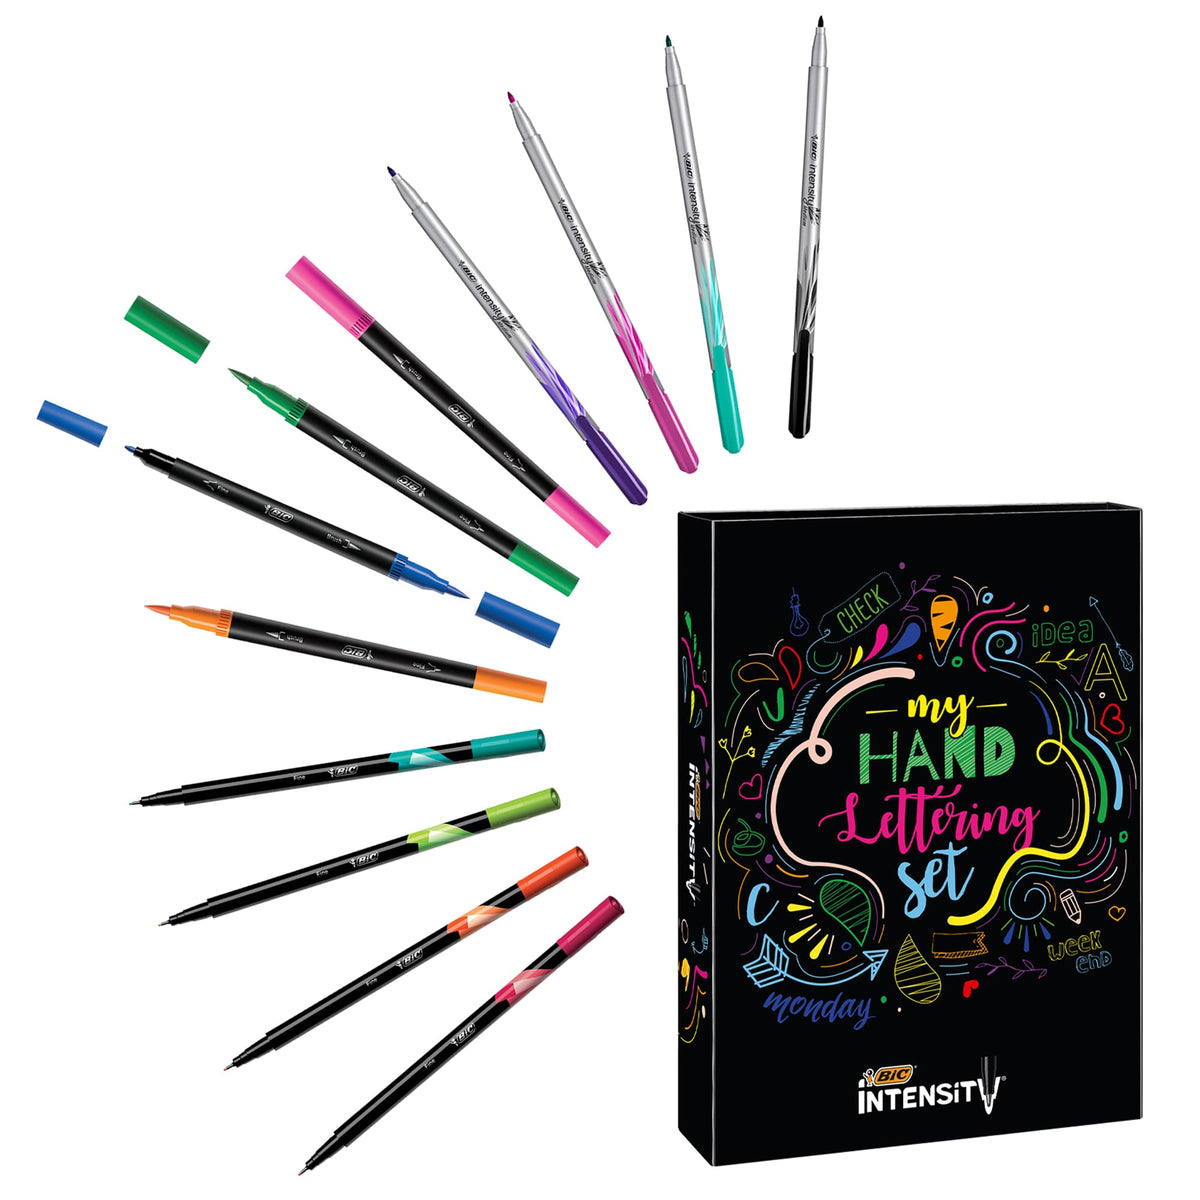  Bic Intensity Colouring Felt Tip Pens for Adults